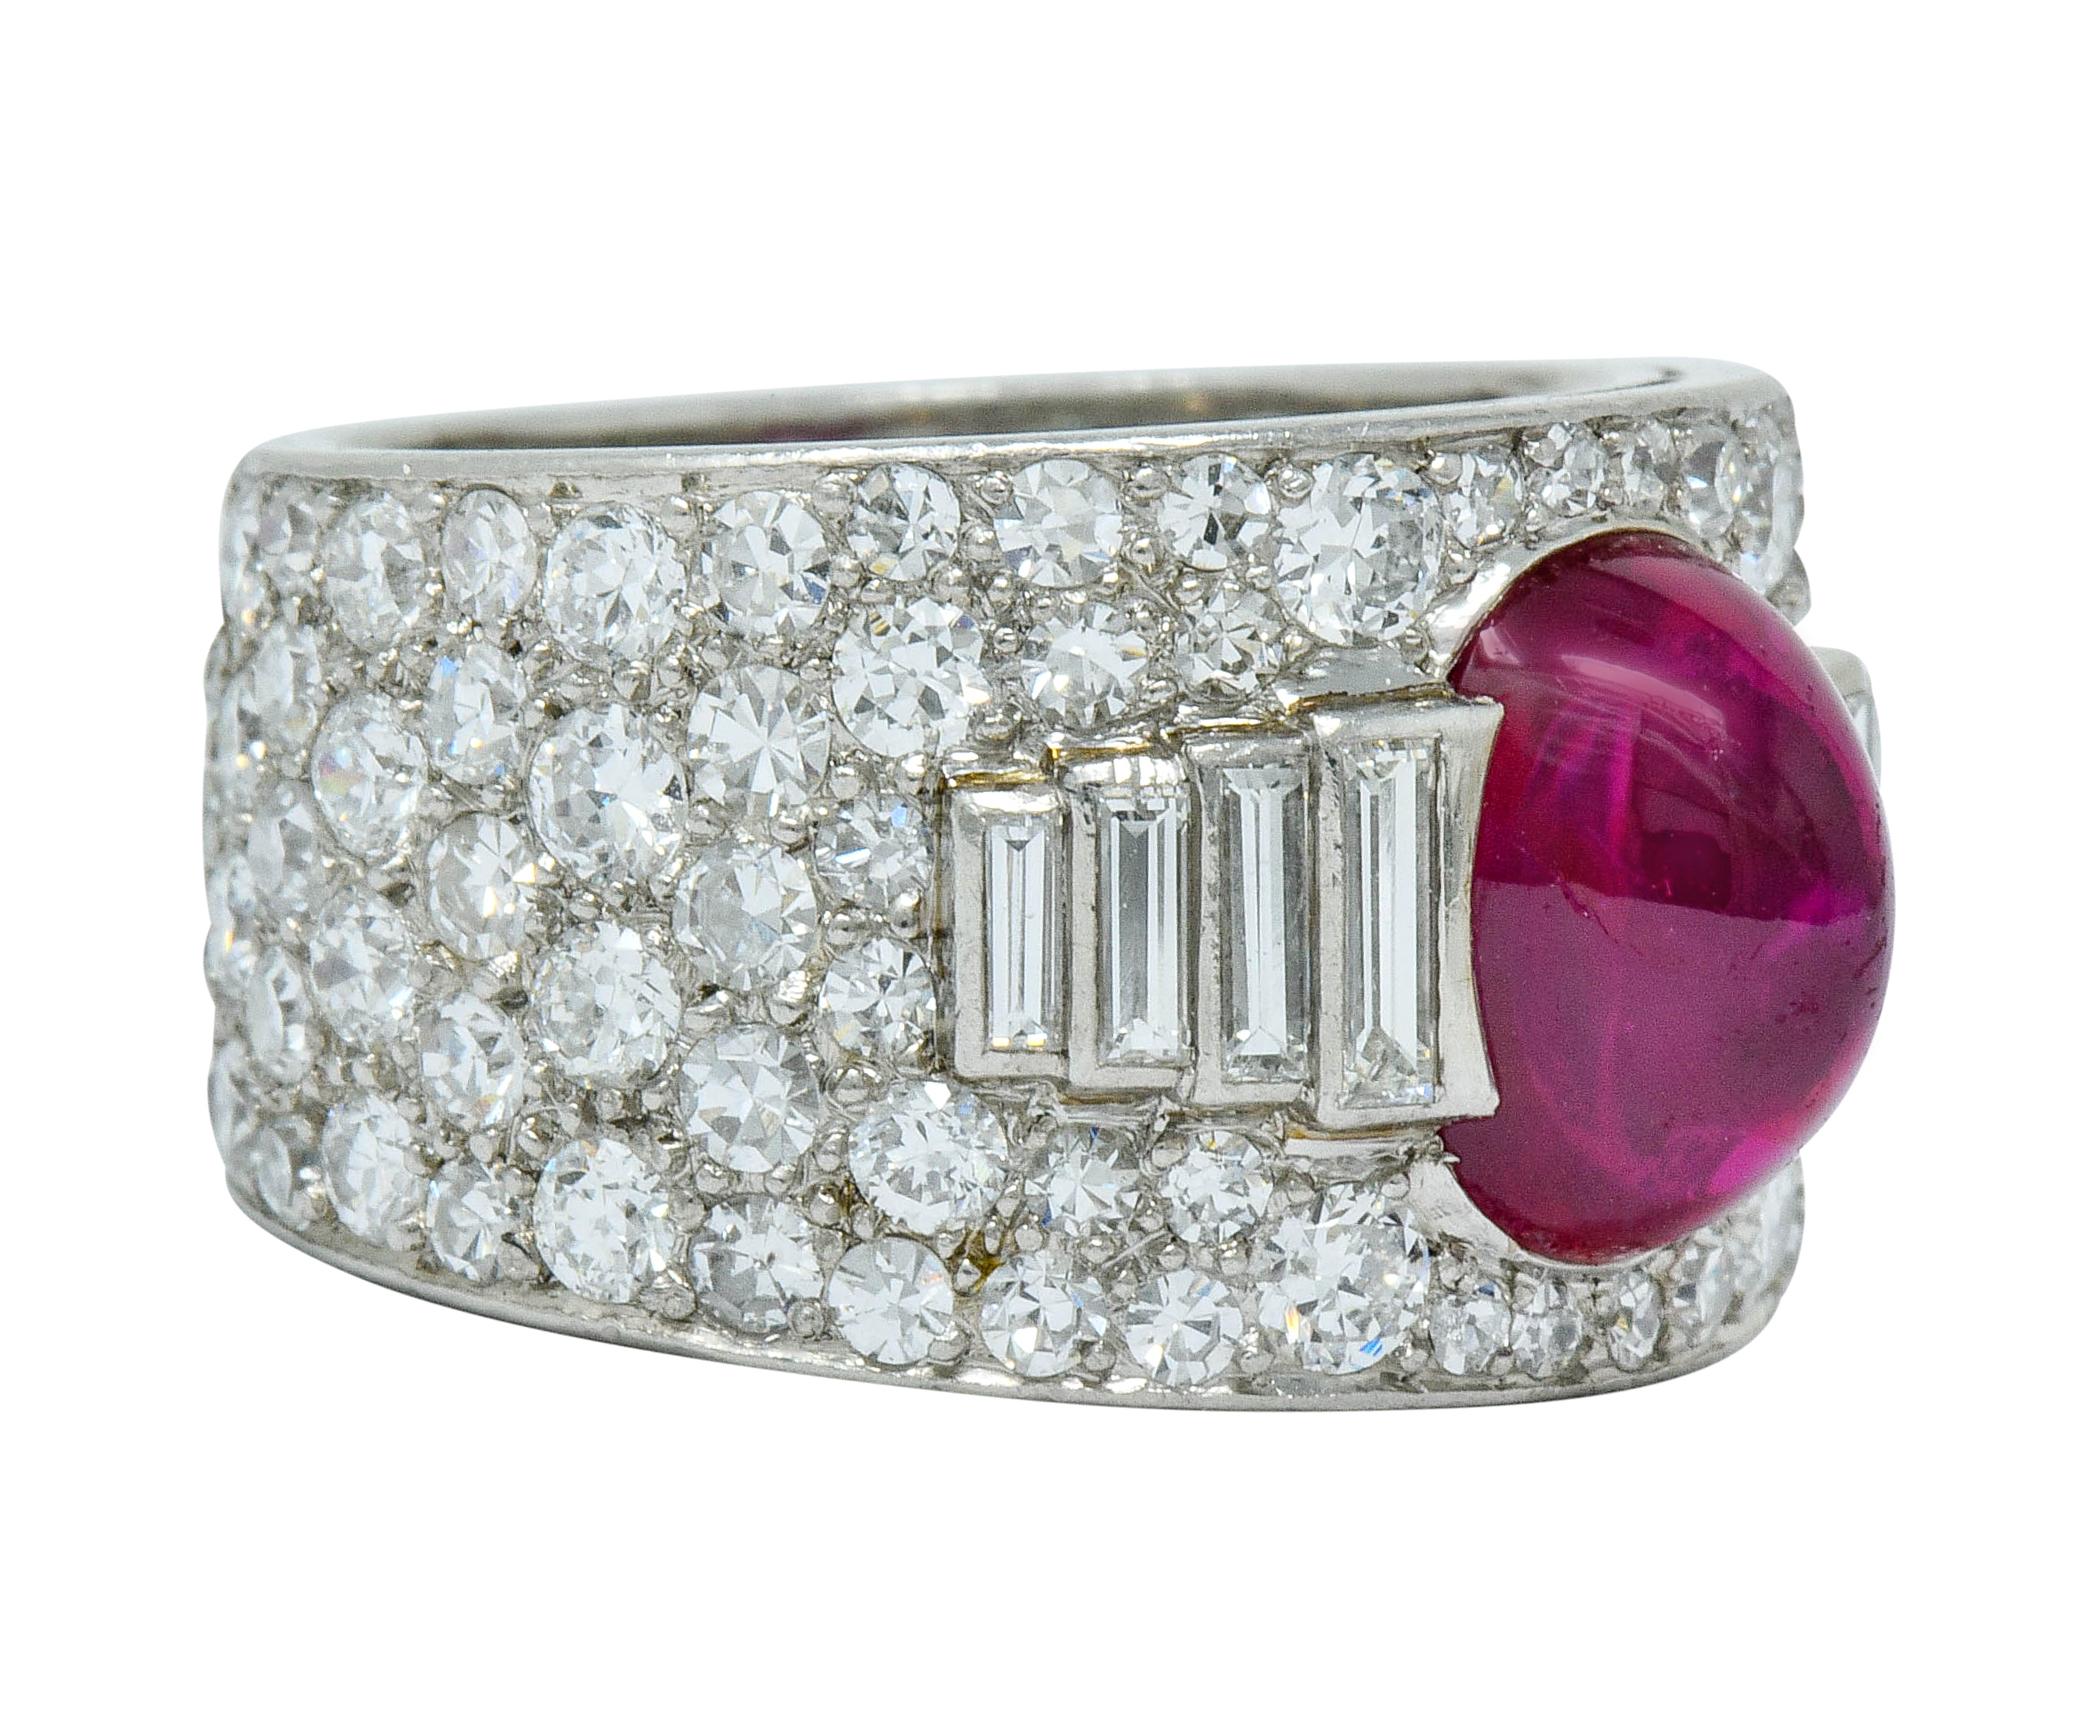 Centering a bullet cabochon Burma ruby weighing approximately 4.50 carats

Natural bright red color with no indications of heat

Flanked by bar set baguette cut diamonds, graduating in size, weighing approximately 0.45 carat total; H/I color with